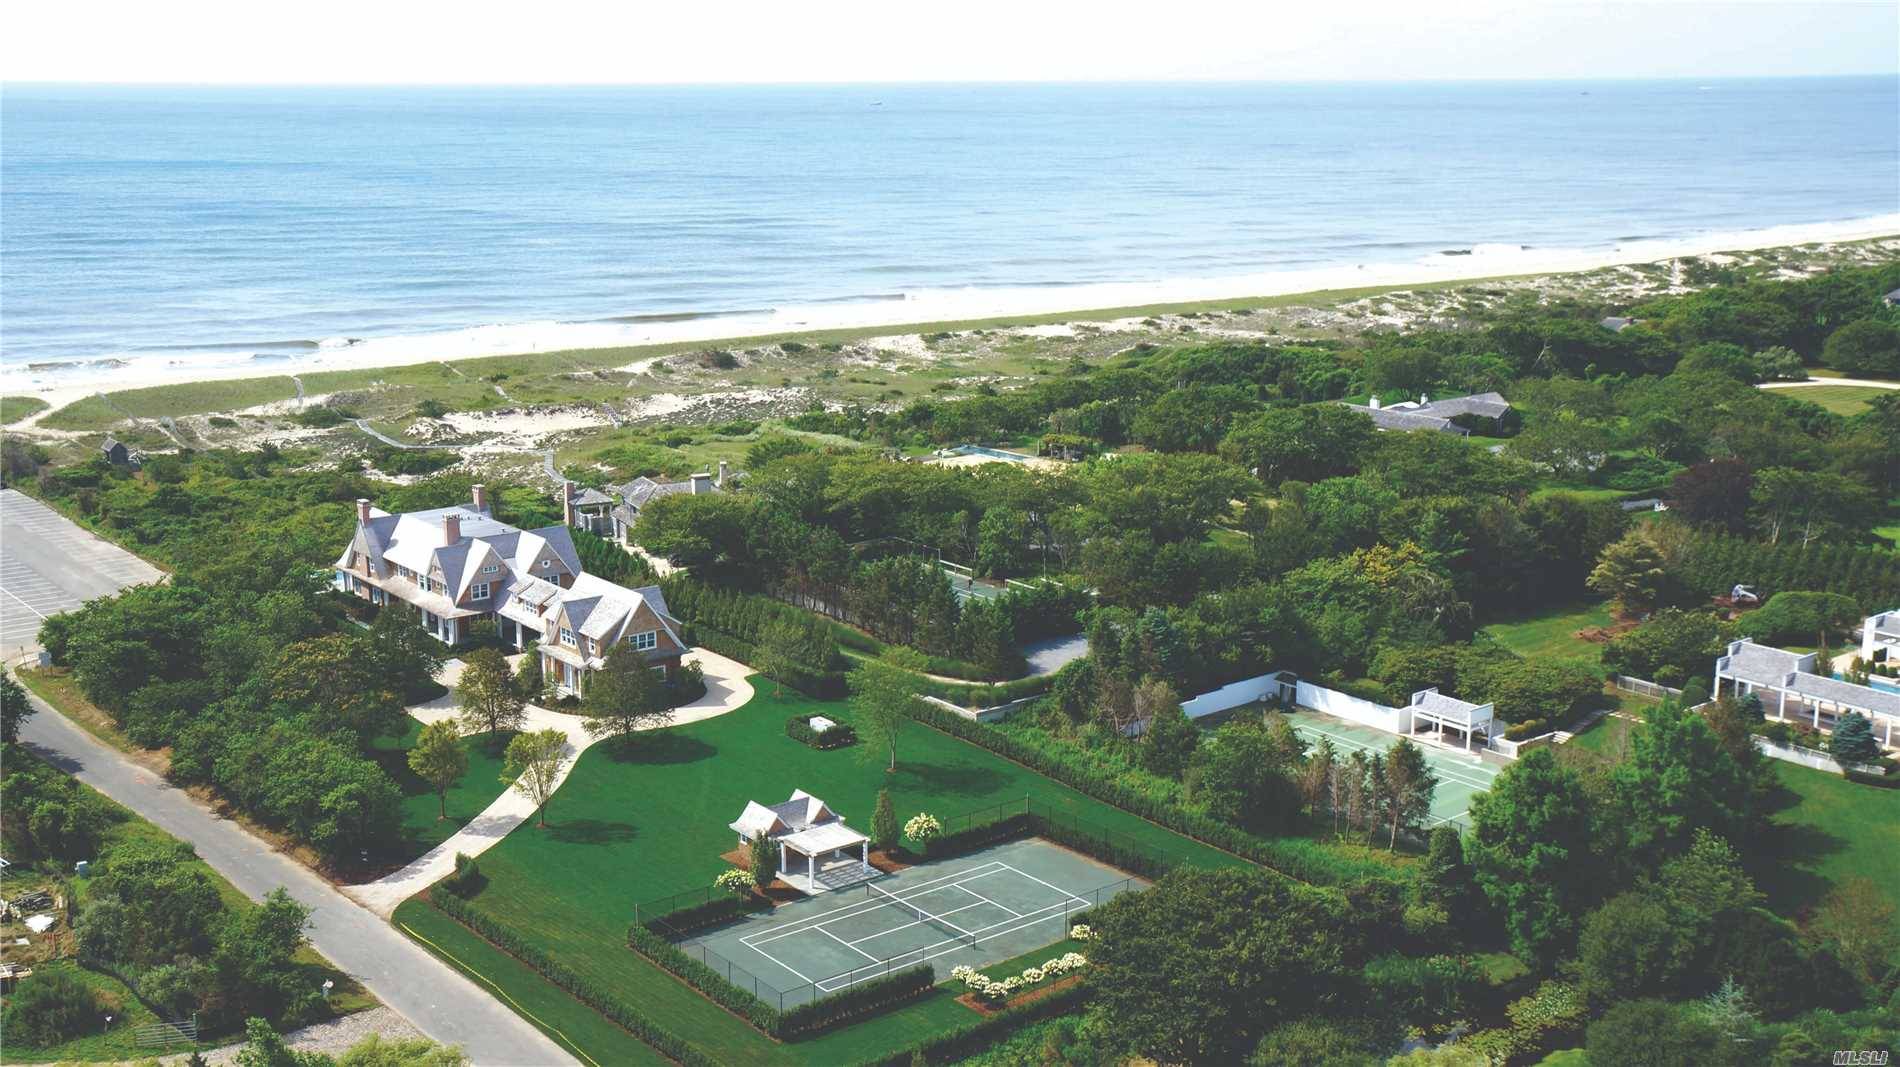 East Hampton oceanfront estate on 3 acres, with an infinity pool, tennis and a beachfront bungalow, is located south of the highway.